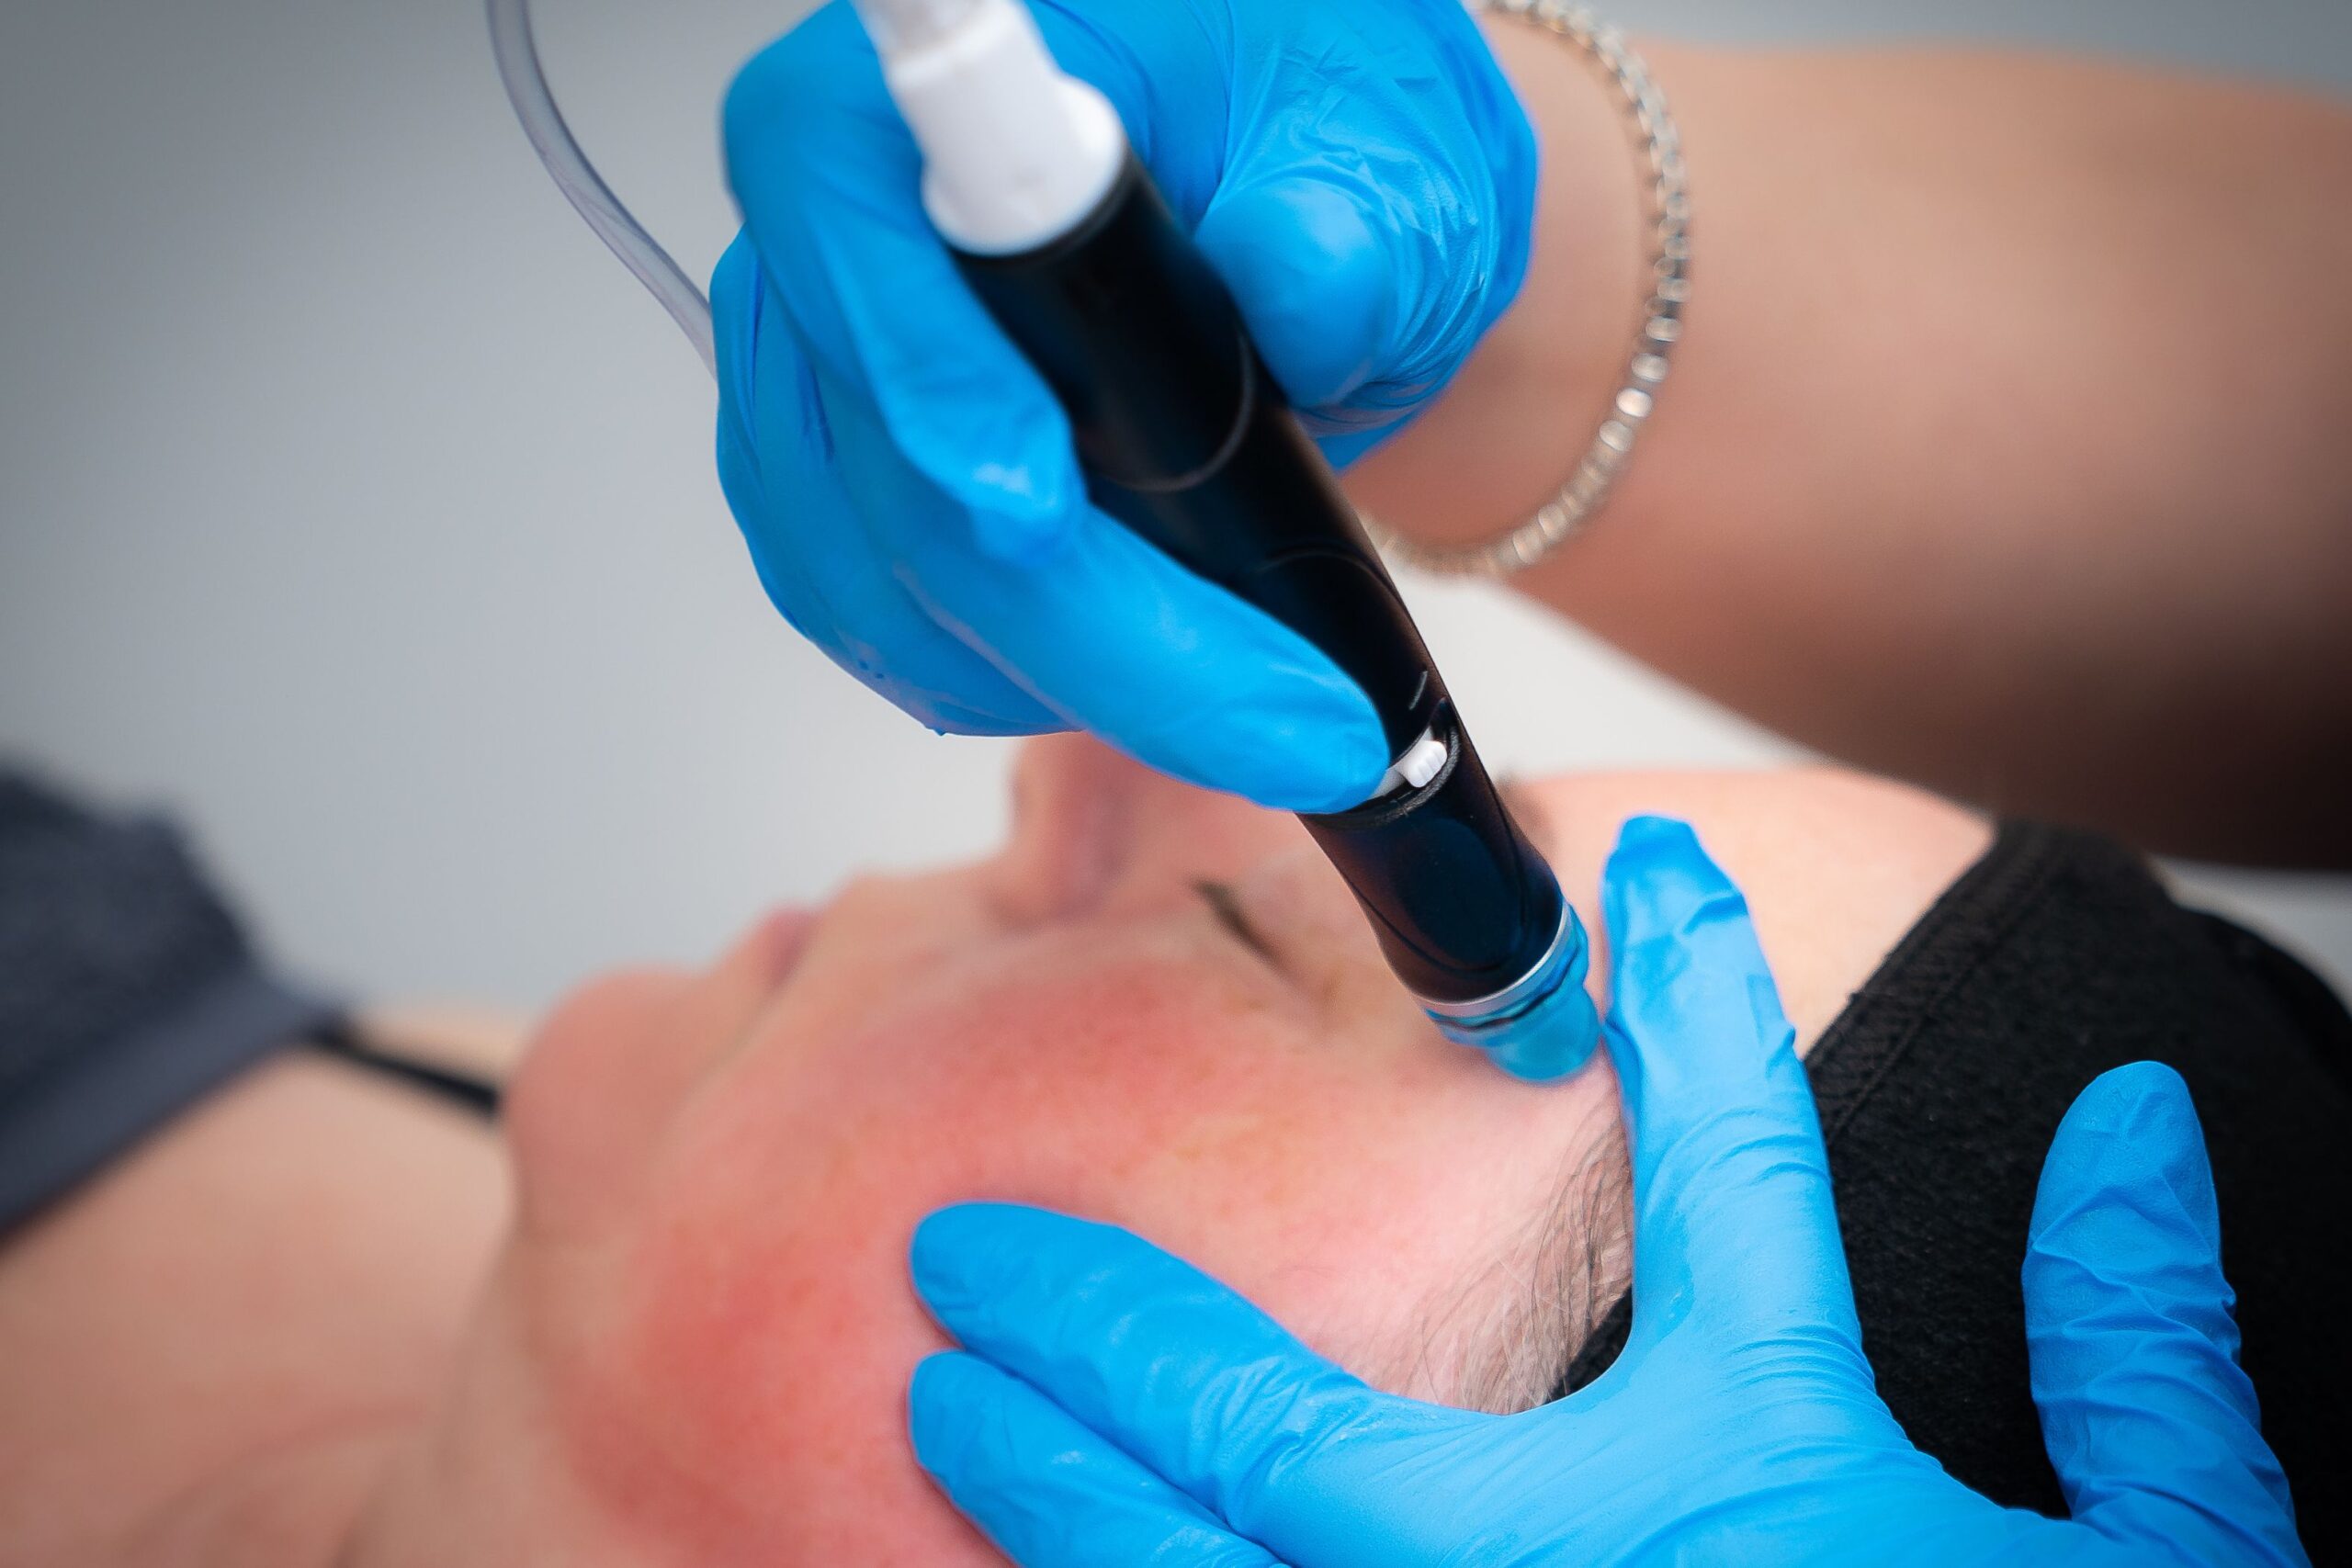 Hydrafacial treatment performed by therapist Hattie, at Freyja Medical Nantwich. 20% Off Facials for a limited time only